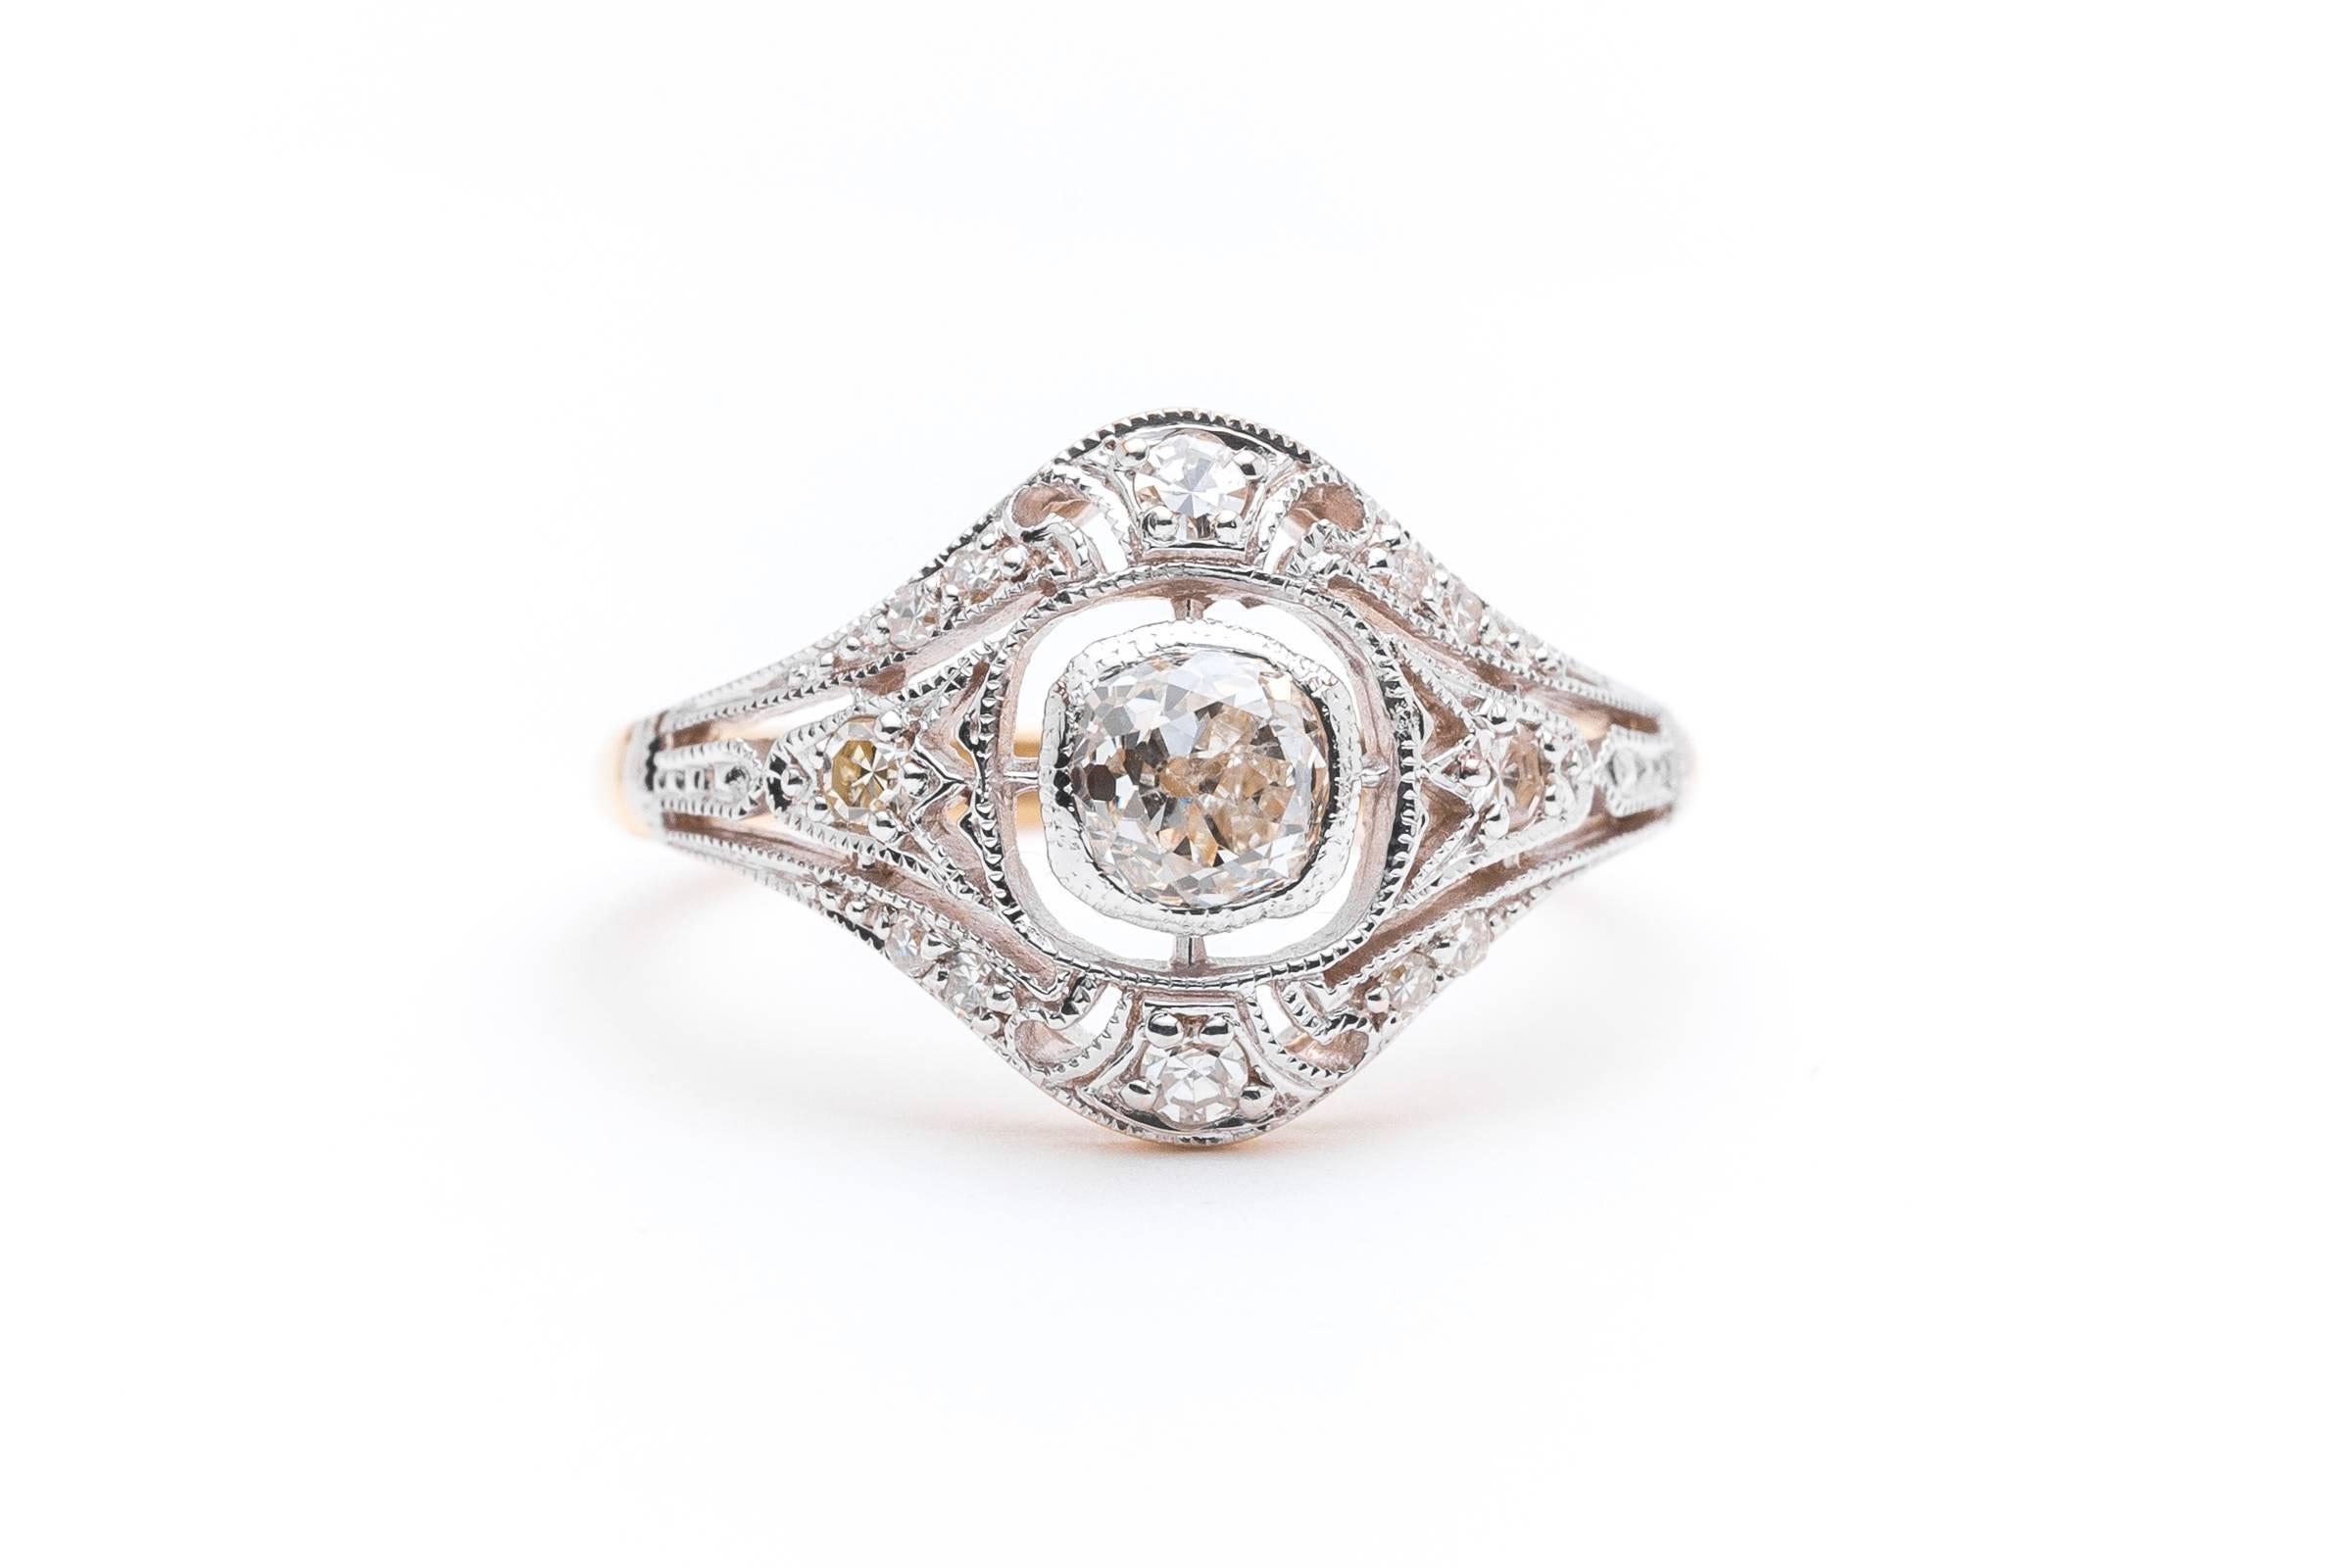 Beacon Hill Jewelers Presents:

A beautiful handmade edwardian platinum and 18 karat yellow gold diamond engagement ring. Centered by a beautiful antique mine cut cushion shaped diamond, this ring features a platinum top as is traditional in